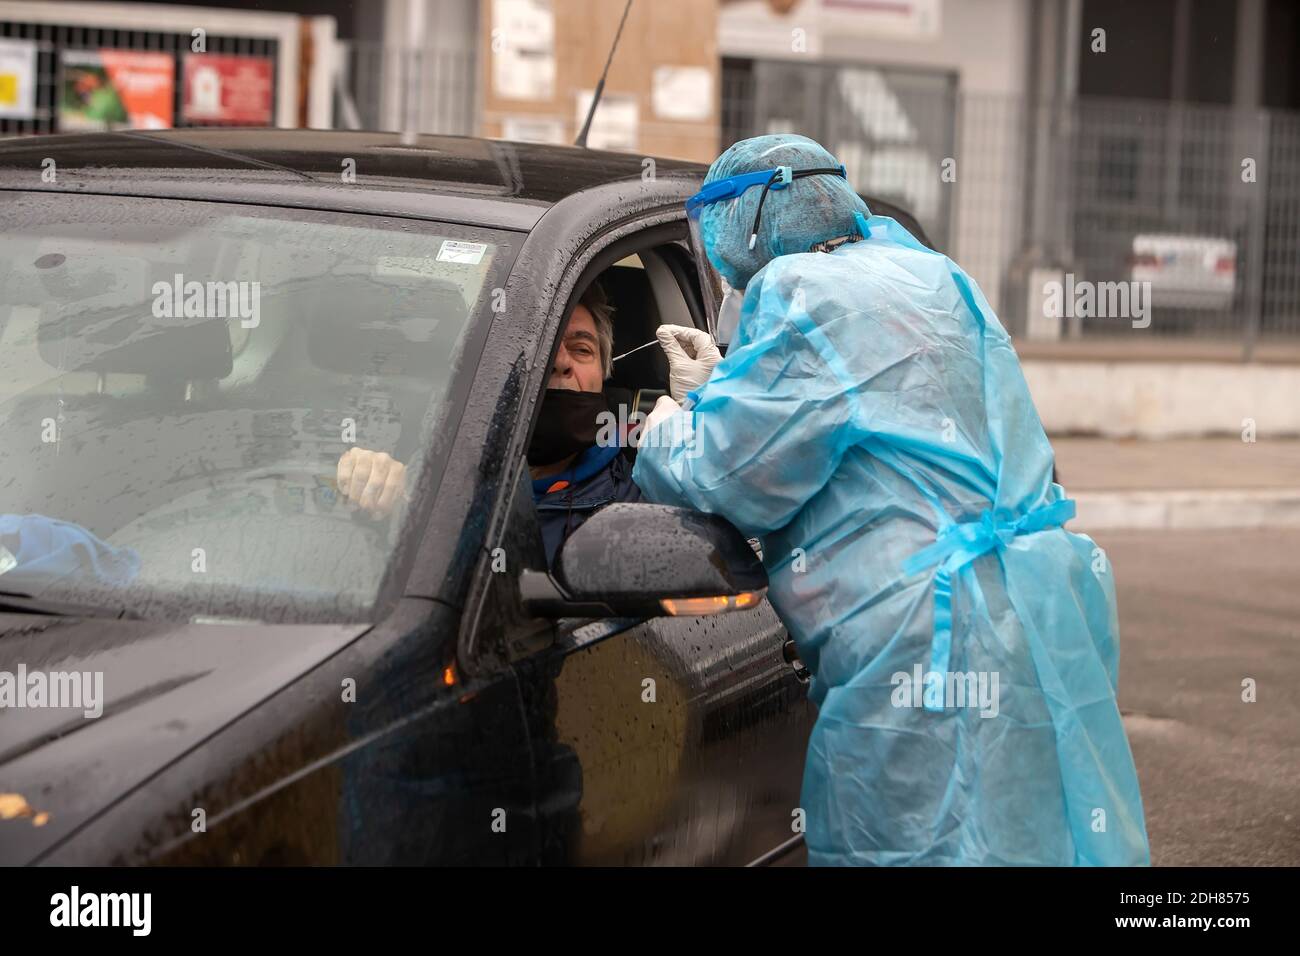 Thessaloniki, Greece - December 10, 2020. A medical worker wearing special suit to protect against coronavirus, conduct a "drive through" rapid testin Stock Photo